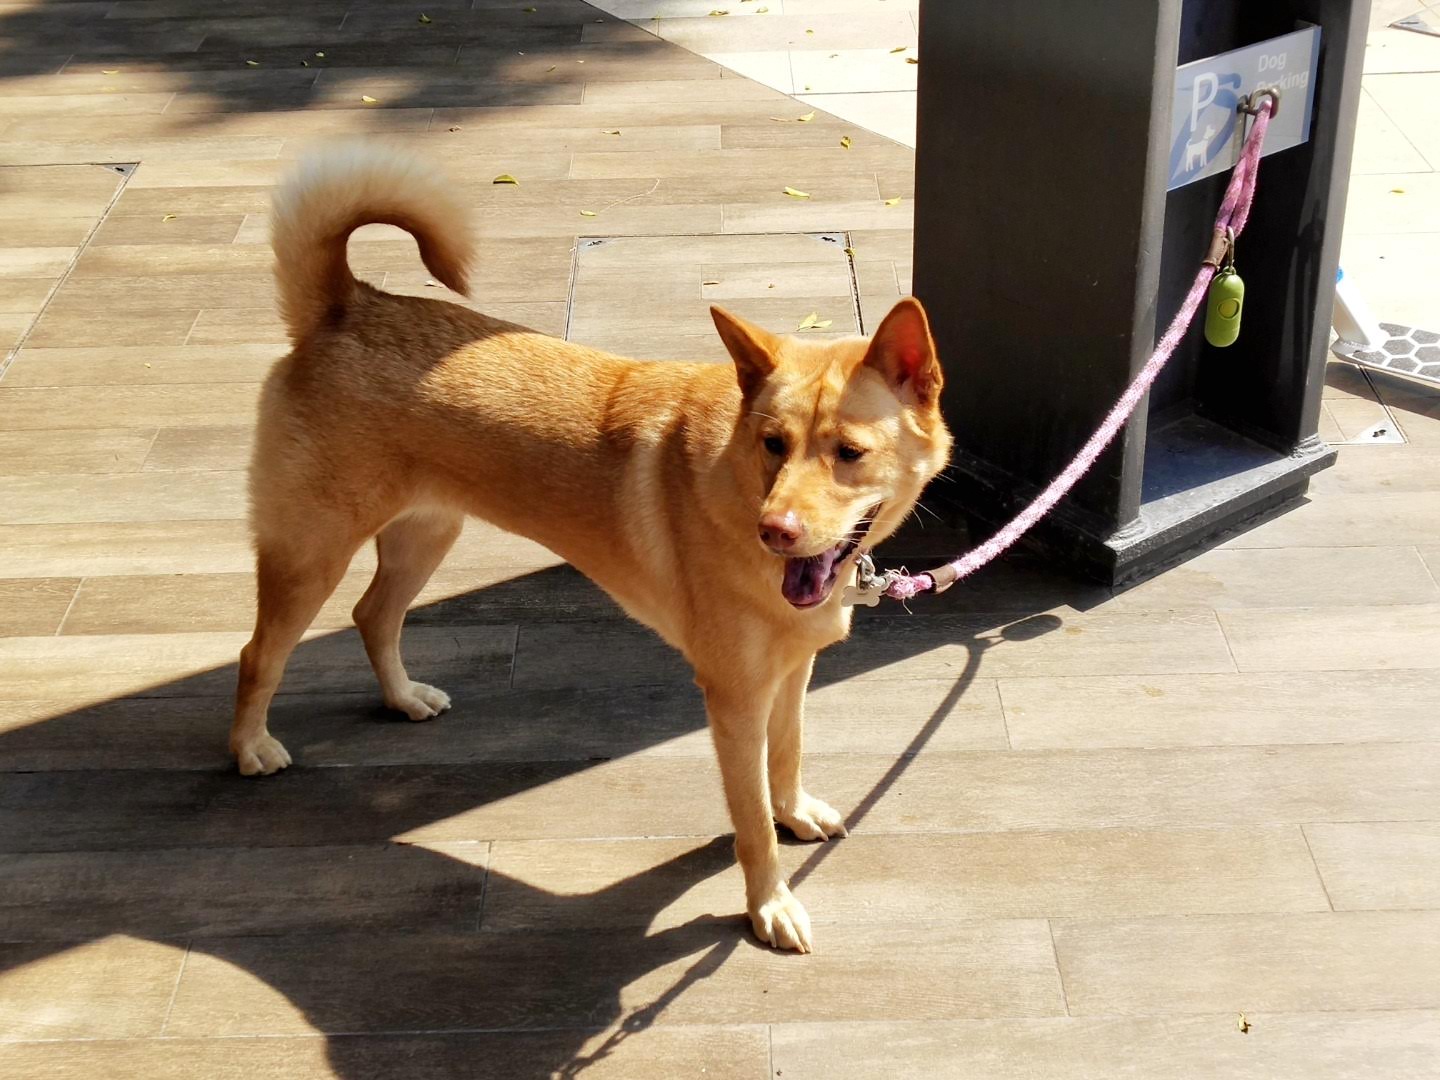 Dog is waiting his owner outside Starbucks.